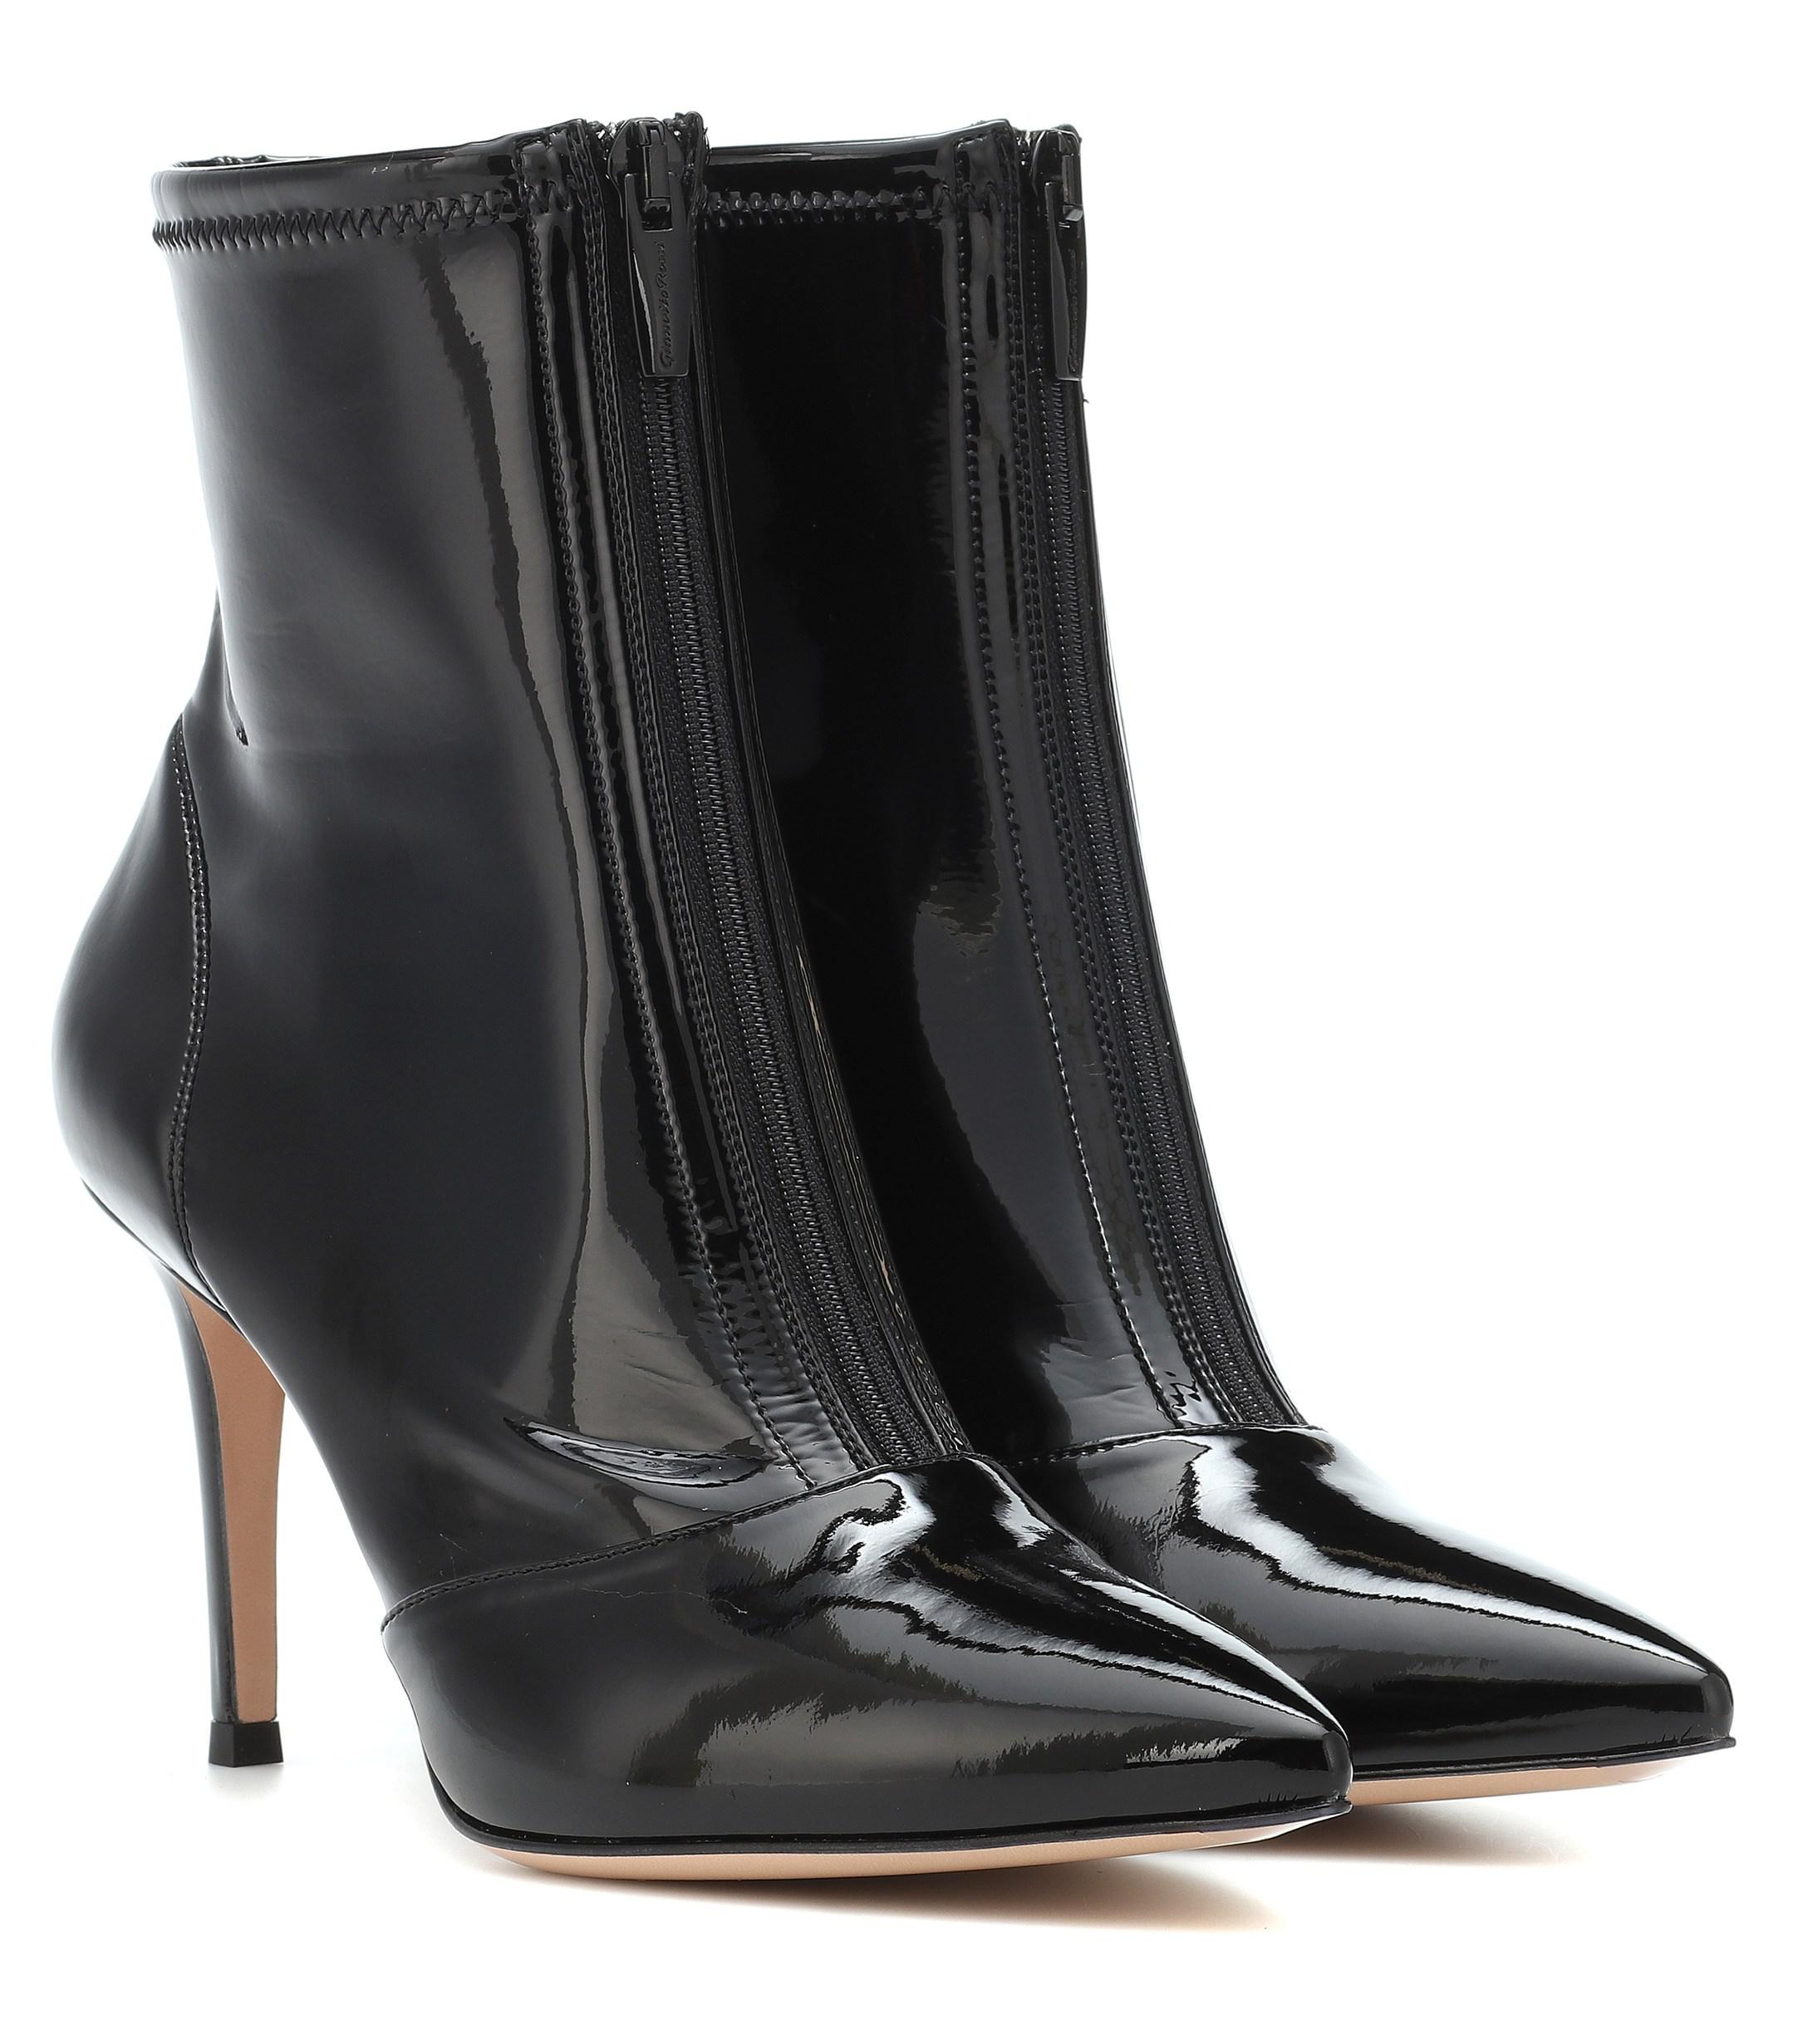 Gianvito Rossi Leather Welch 85 Vinyl Ankle Boots in Black - Lyst